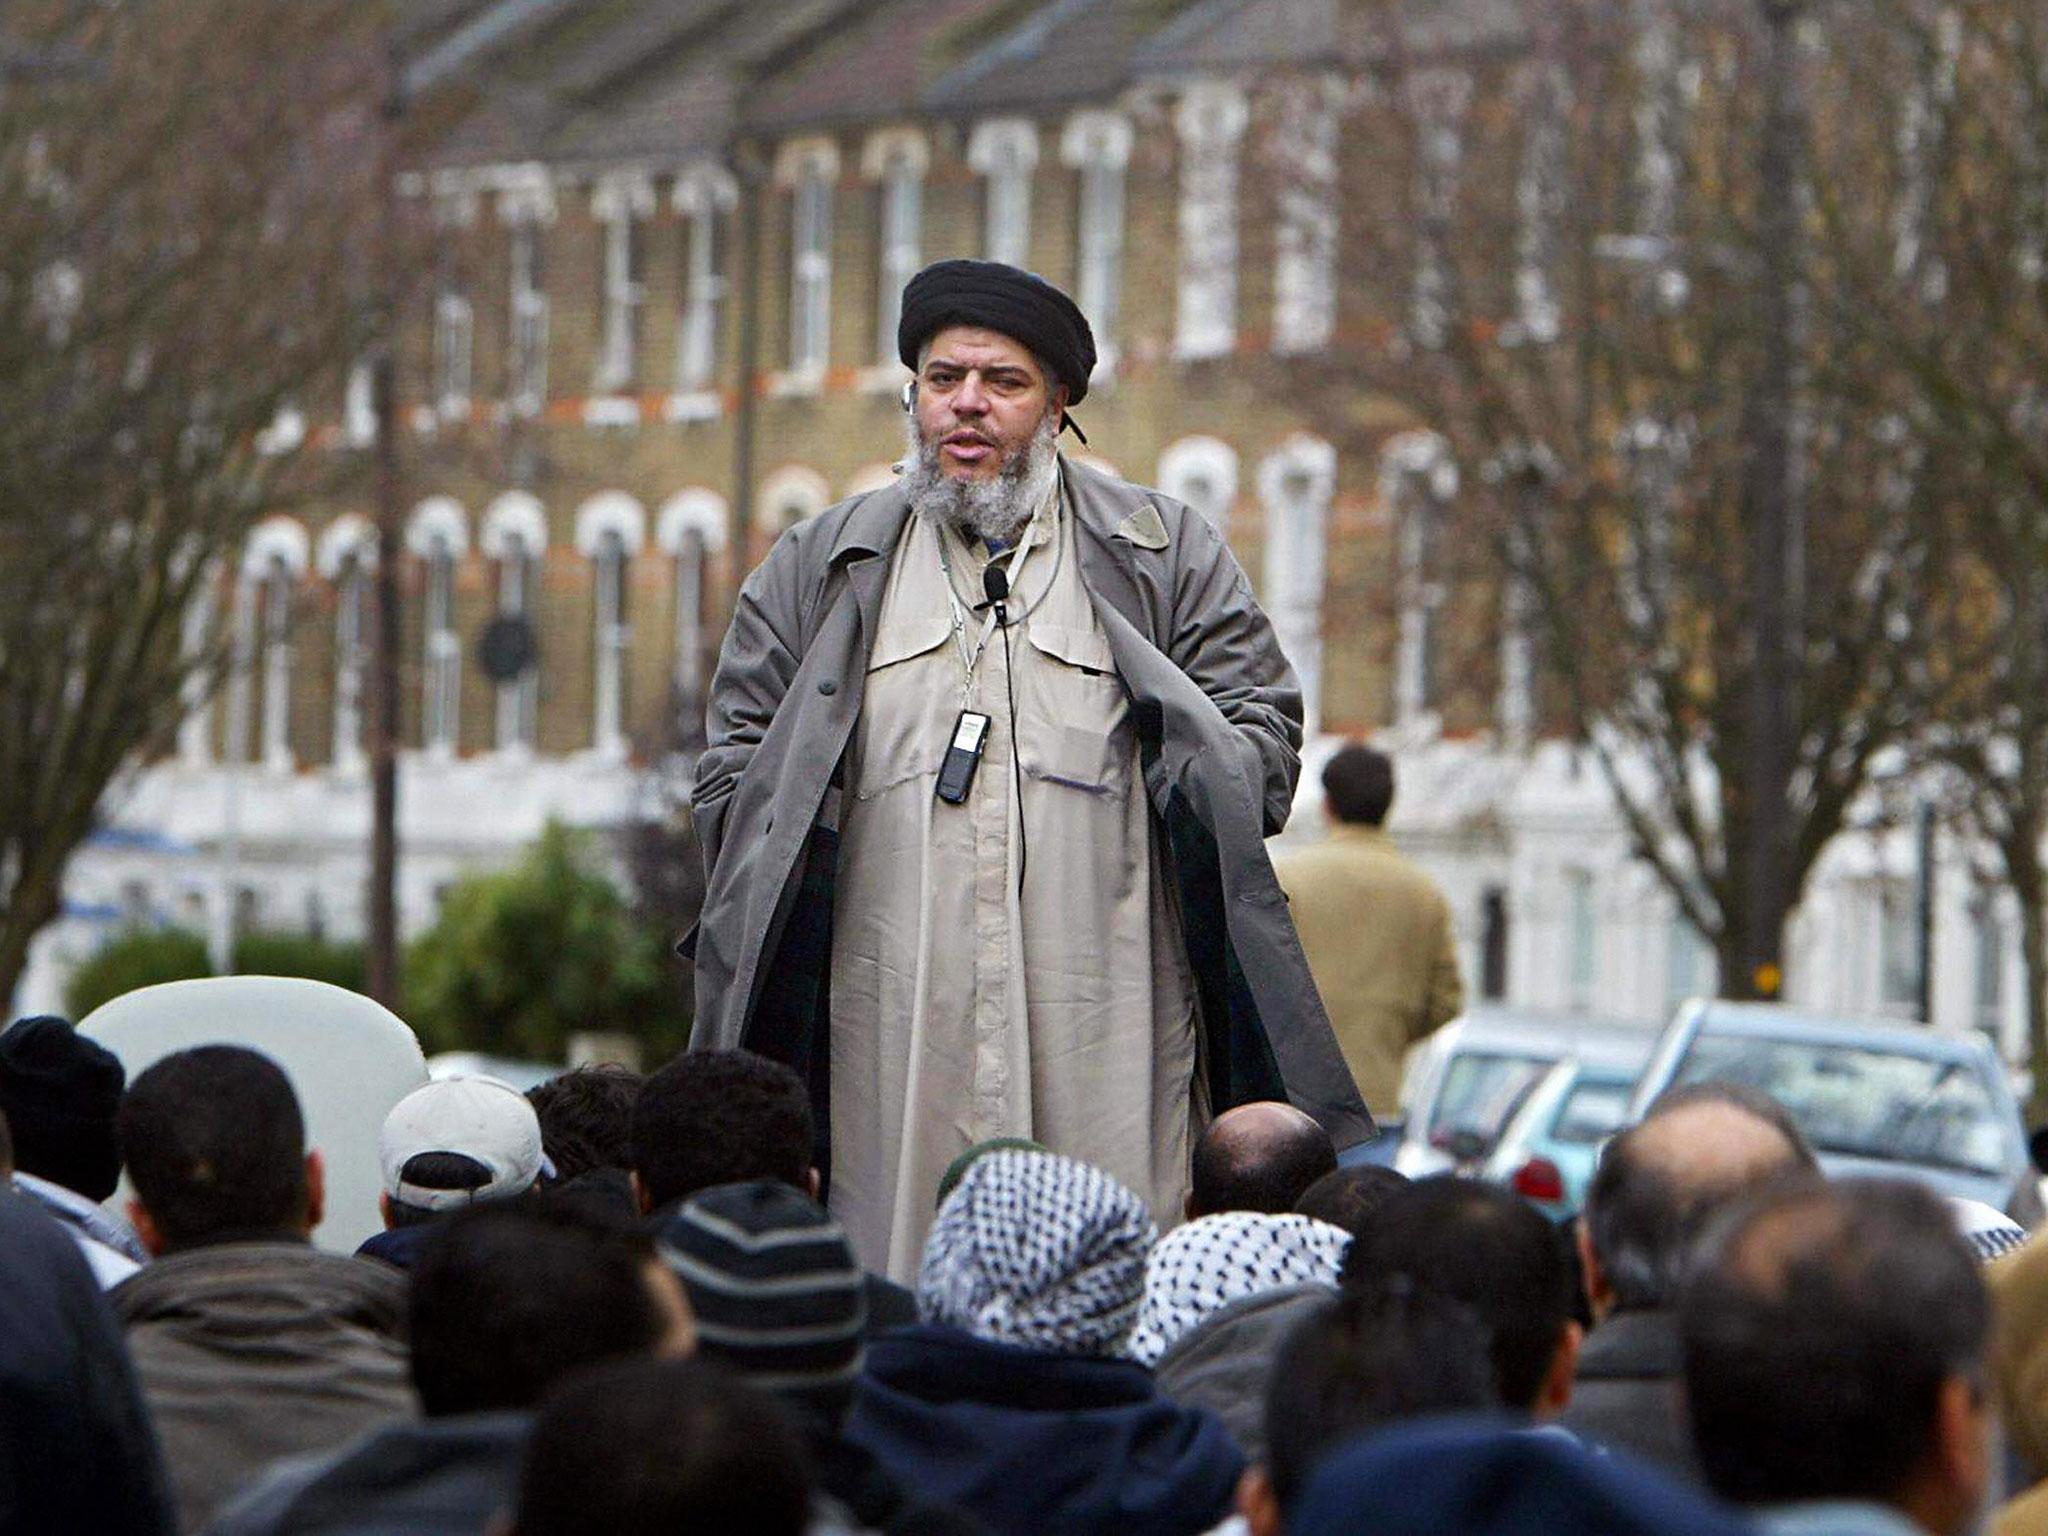 Radical muslim cleric Abu Hamza outside the Finsbury Park mosque in 2004